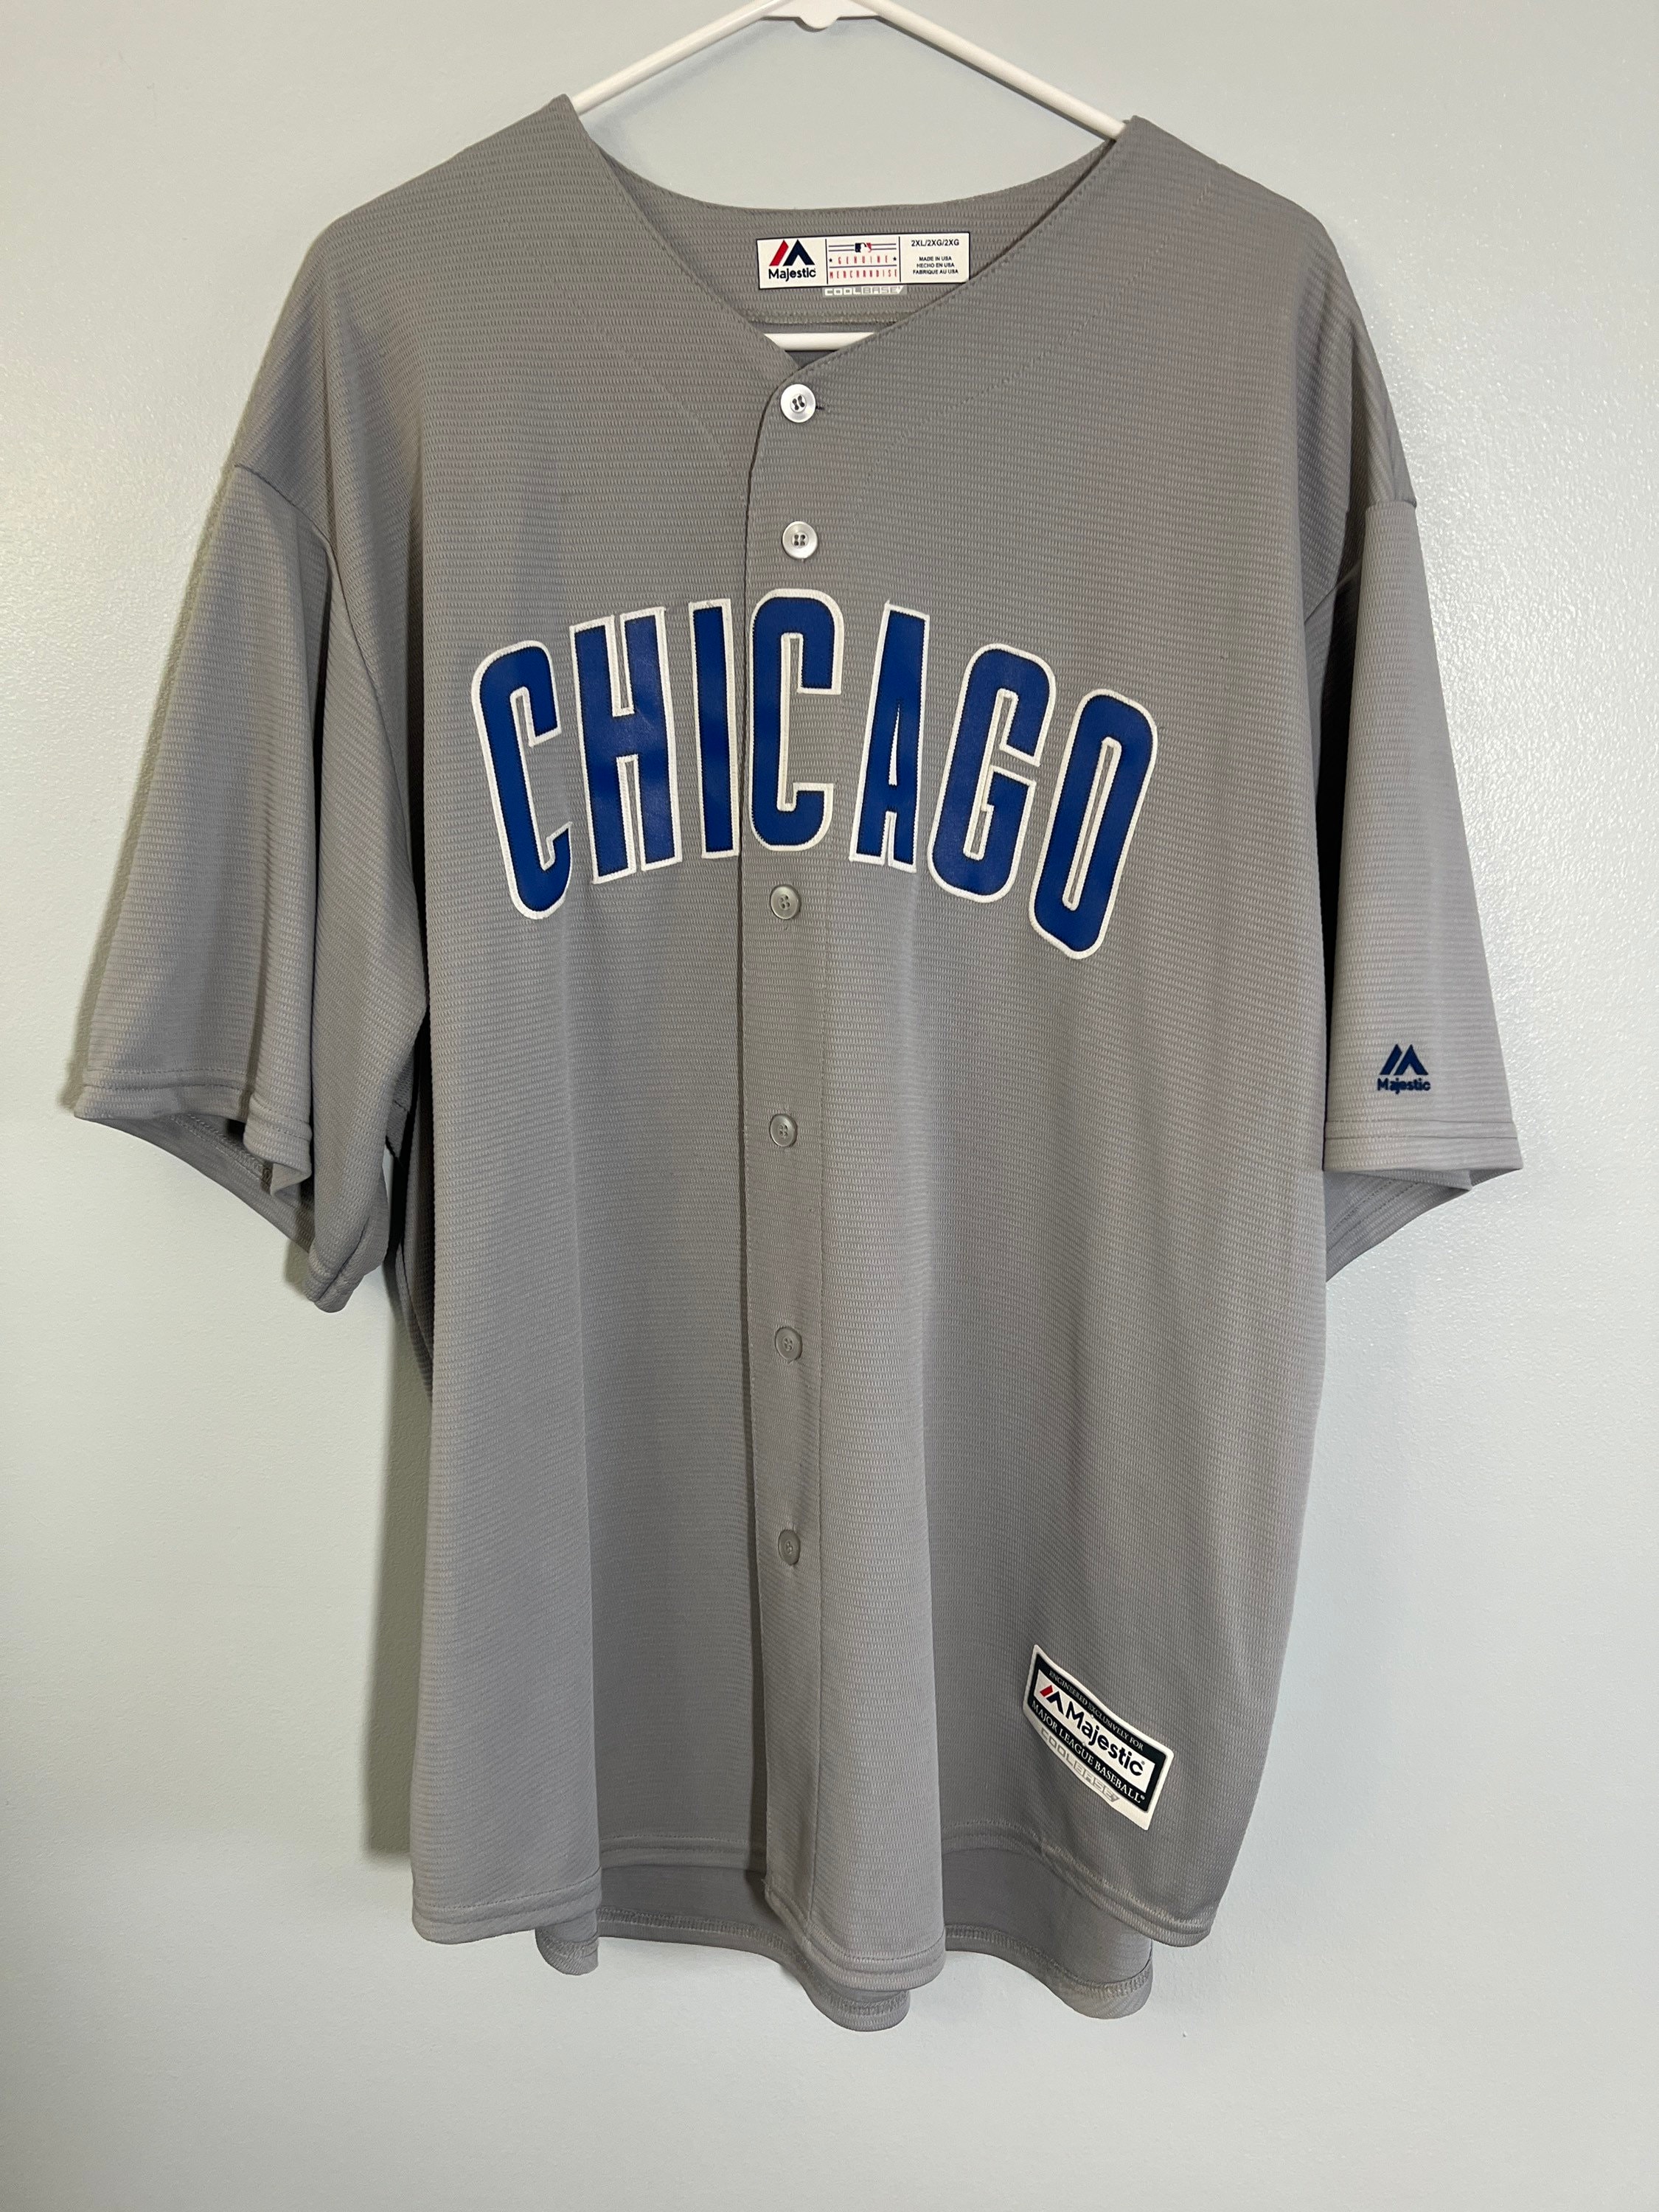 MLB Chicago Cubs Kris Bryant 17 Majestic White Stripe Jersey Youth L 14 16